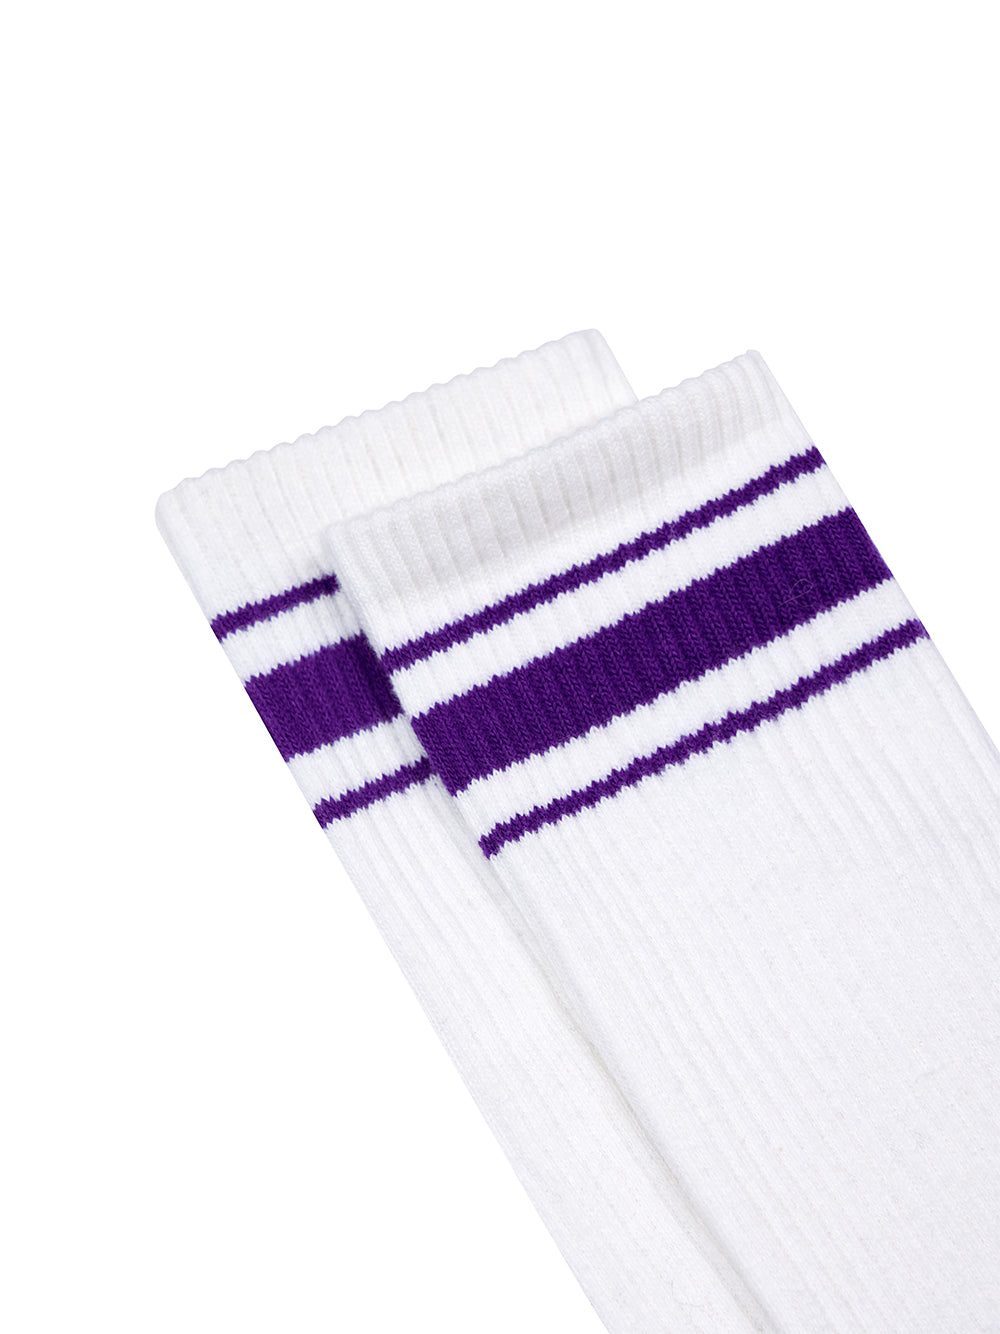 TEAM WANG design x CHUANG ASIA Knee Lenght Stocking (White)